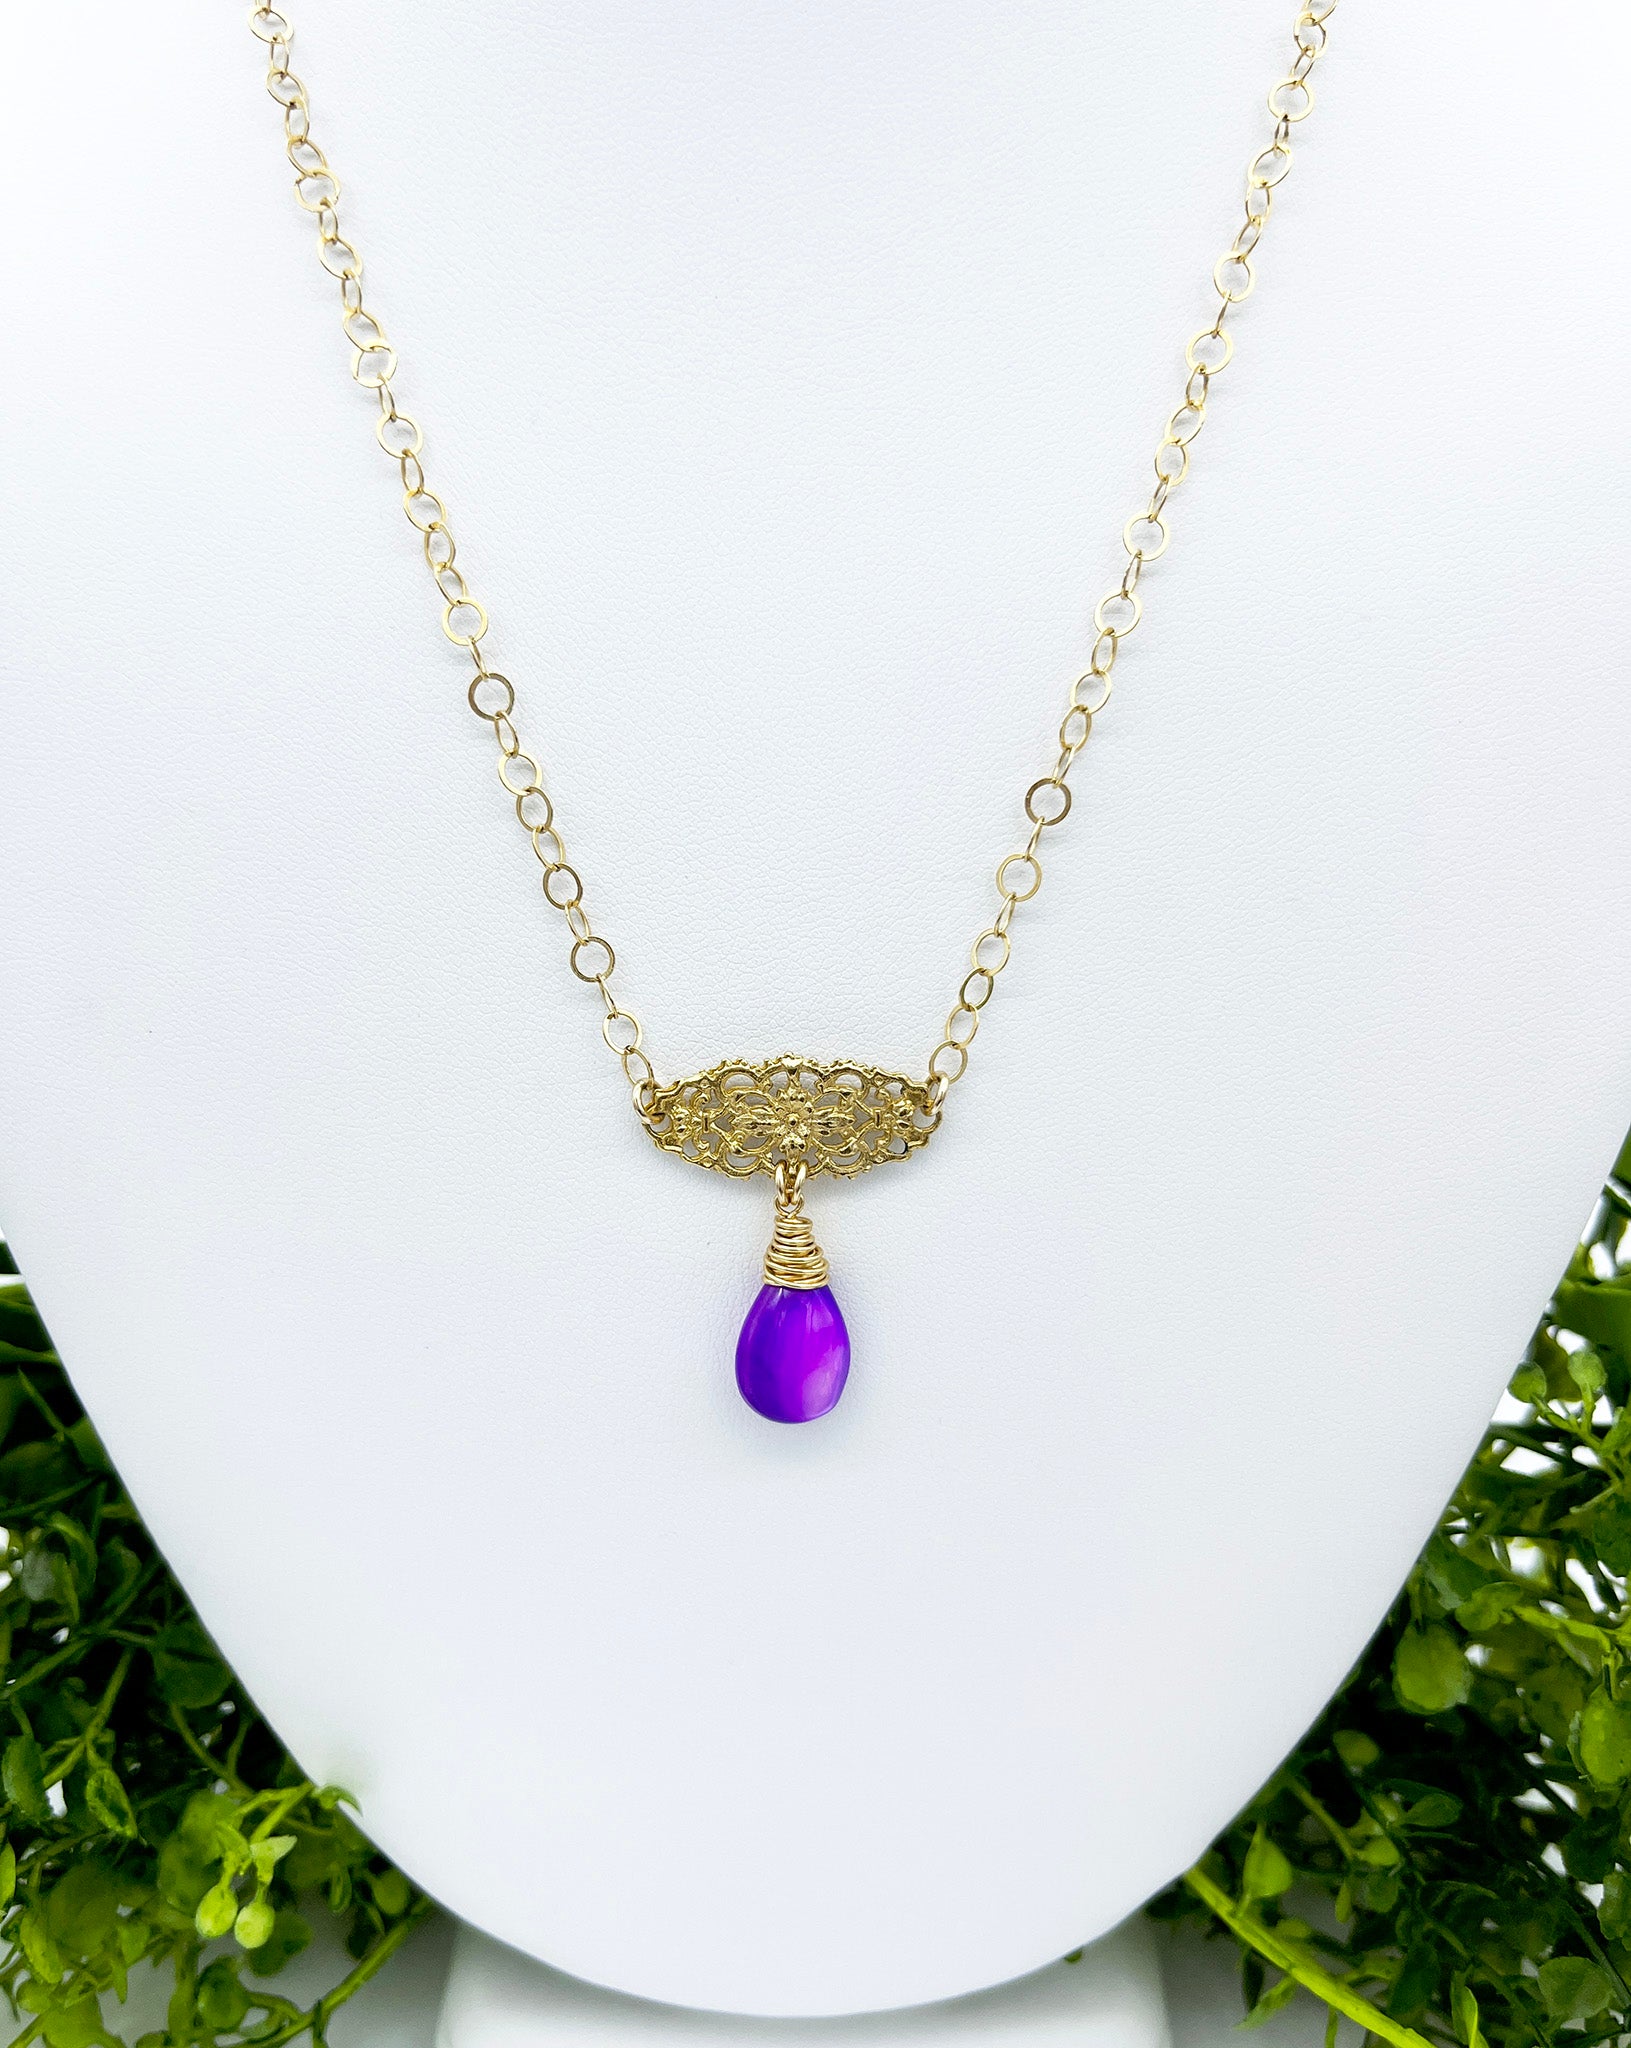 Gold and purple pearl necklace